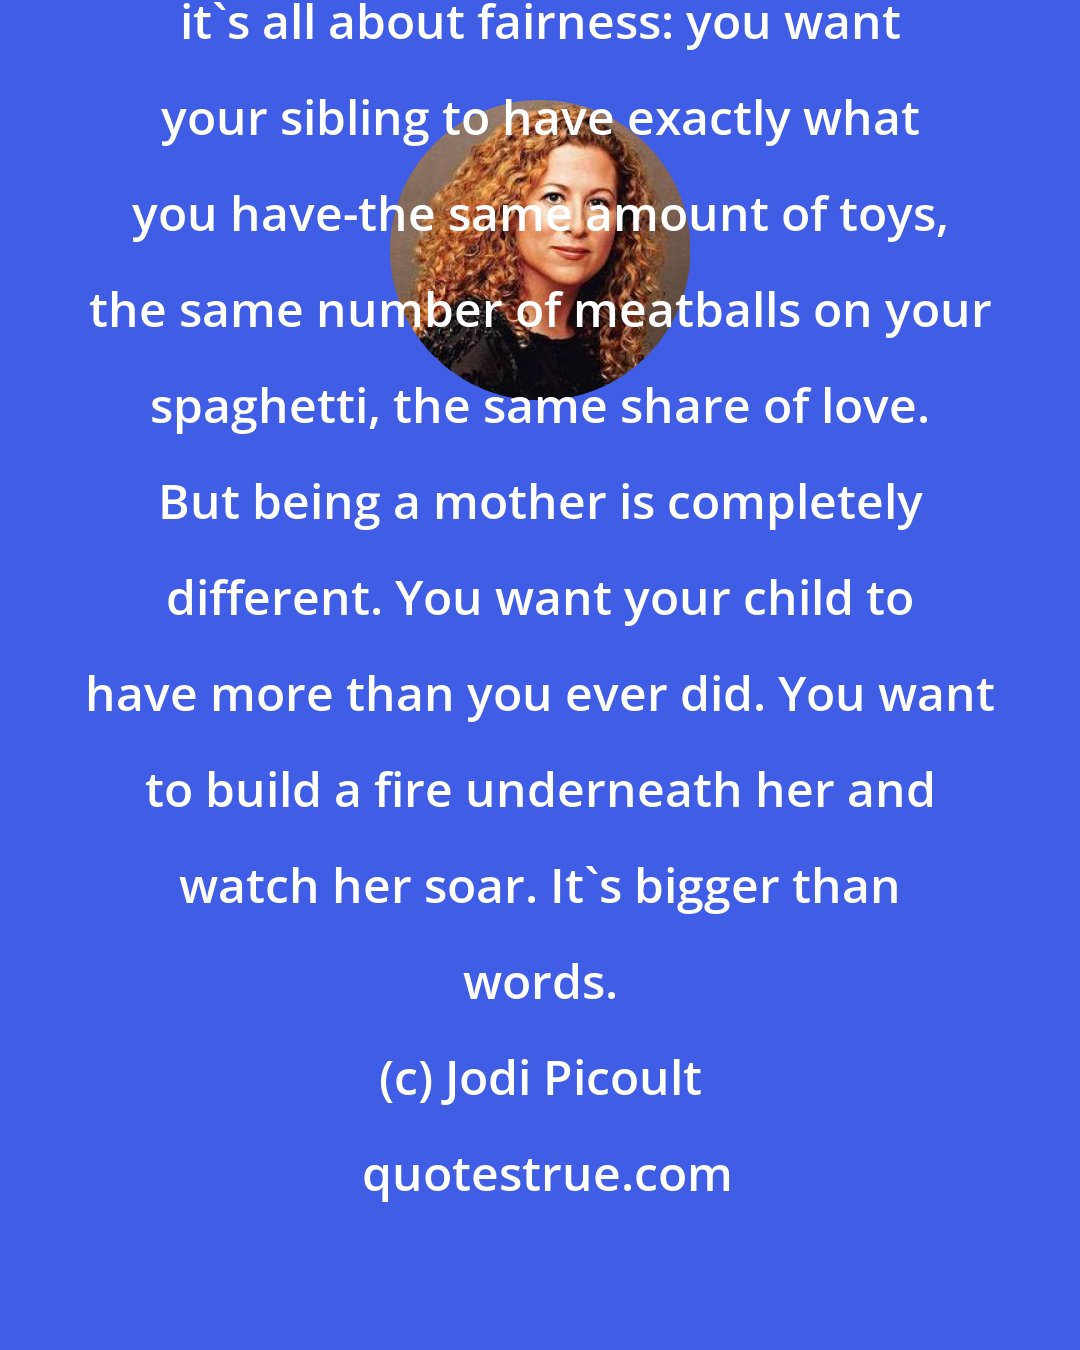 Jodi Picoult: I have a sister, so I know-that relationship, it's all about fairness: you want your sibling to have exactly what you have-the same amount of toys, the same number of meatballs on your spaghetti, the same share of love. But being a mother is completely different. You want your child to have more than you ever did. You want to build a fire underneath her and watch her soar. It's bigger than words.